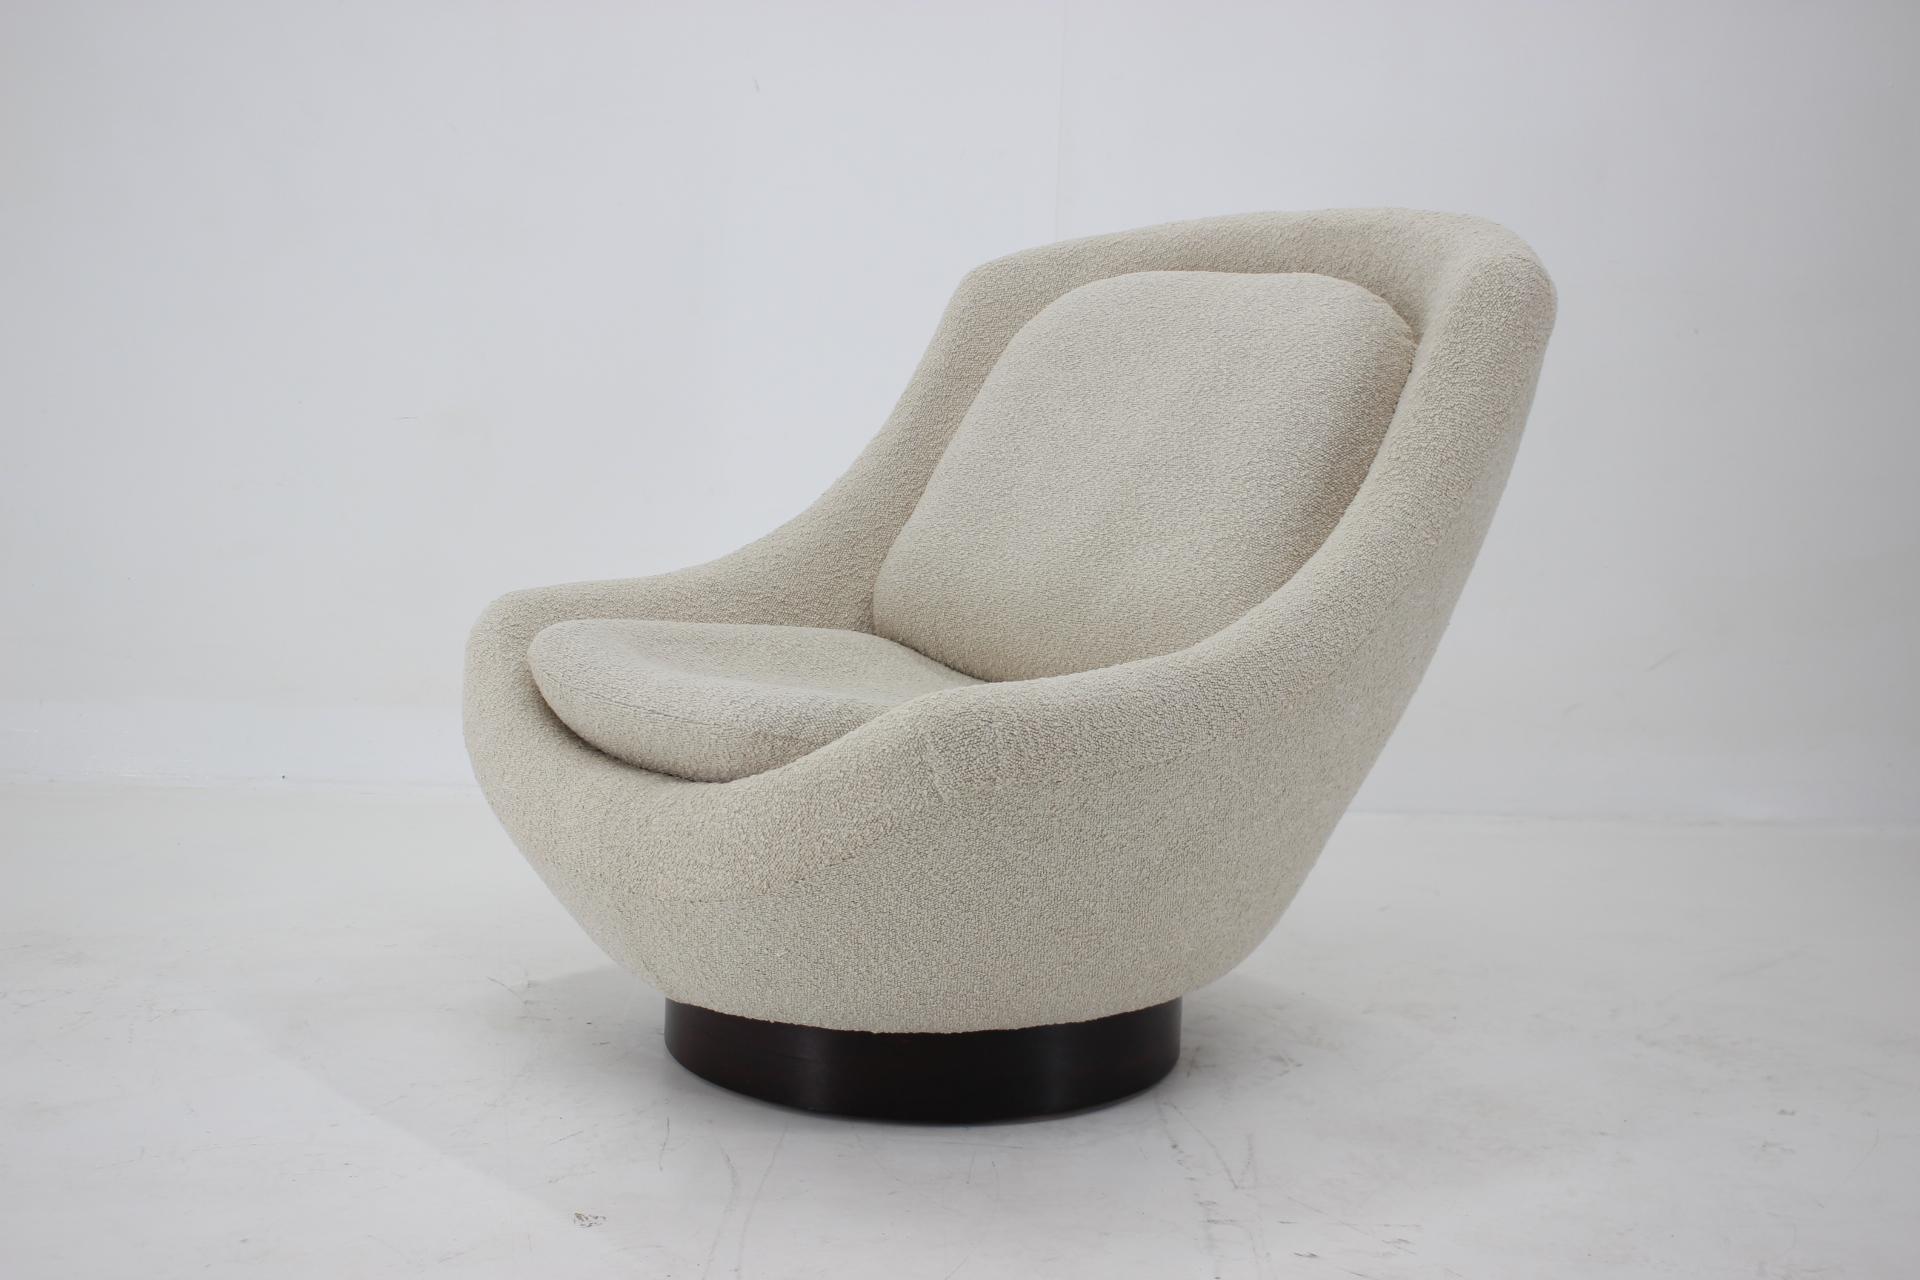 - made in Germany 
- newly upholstered -veneered round wooden base
- Height of seat 38 cm.